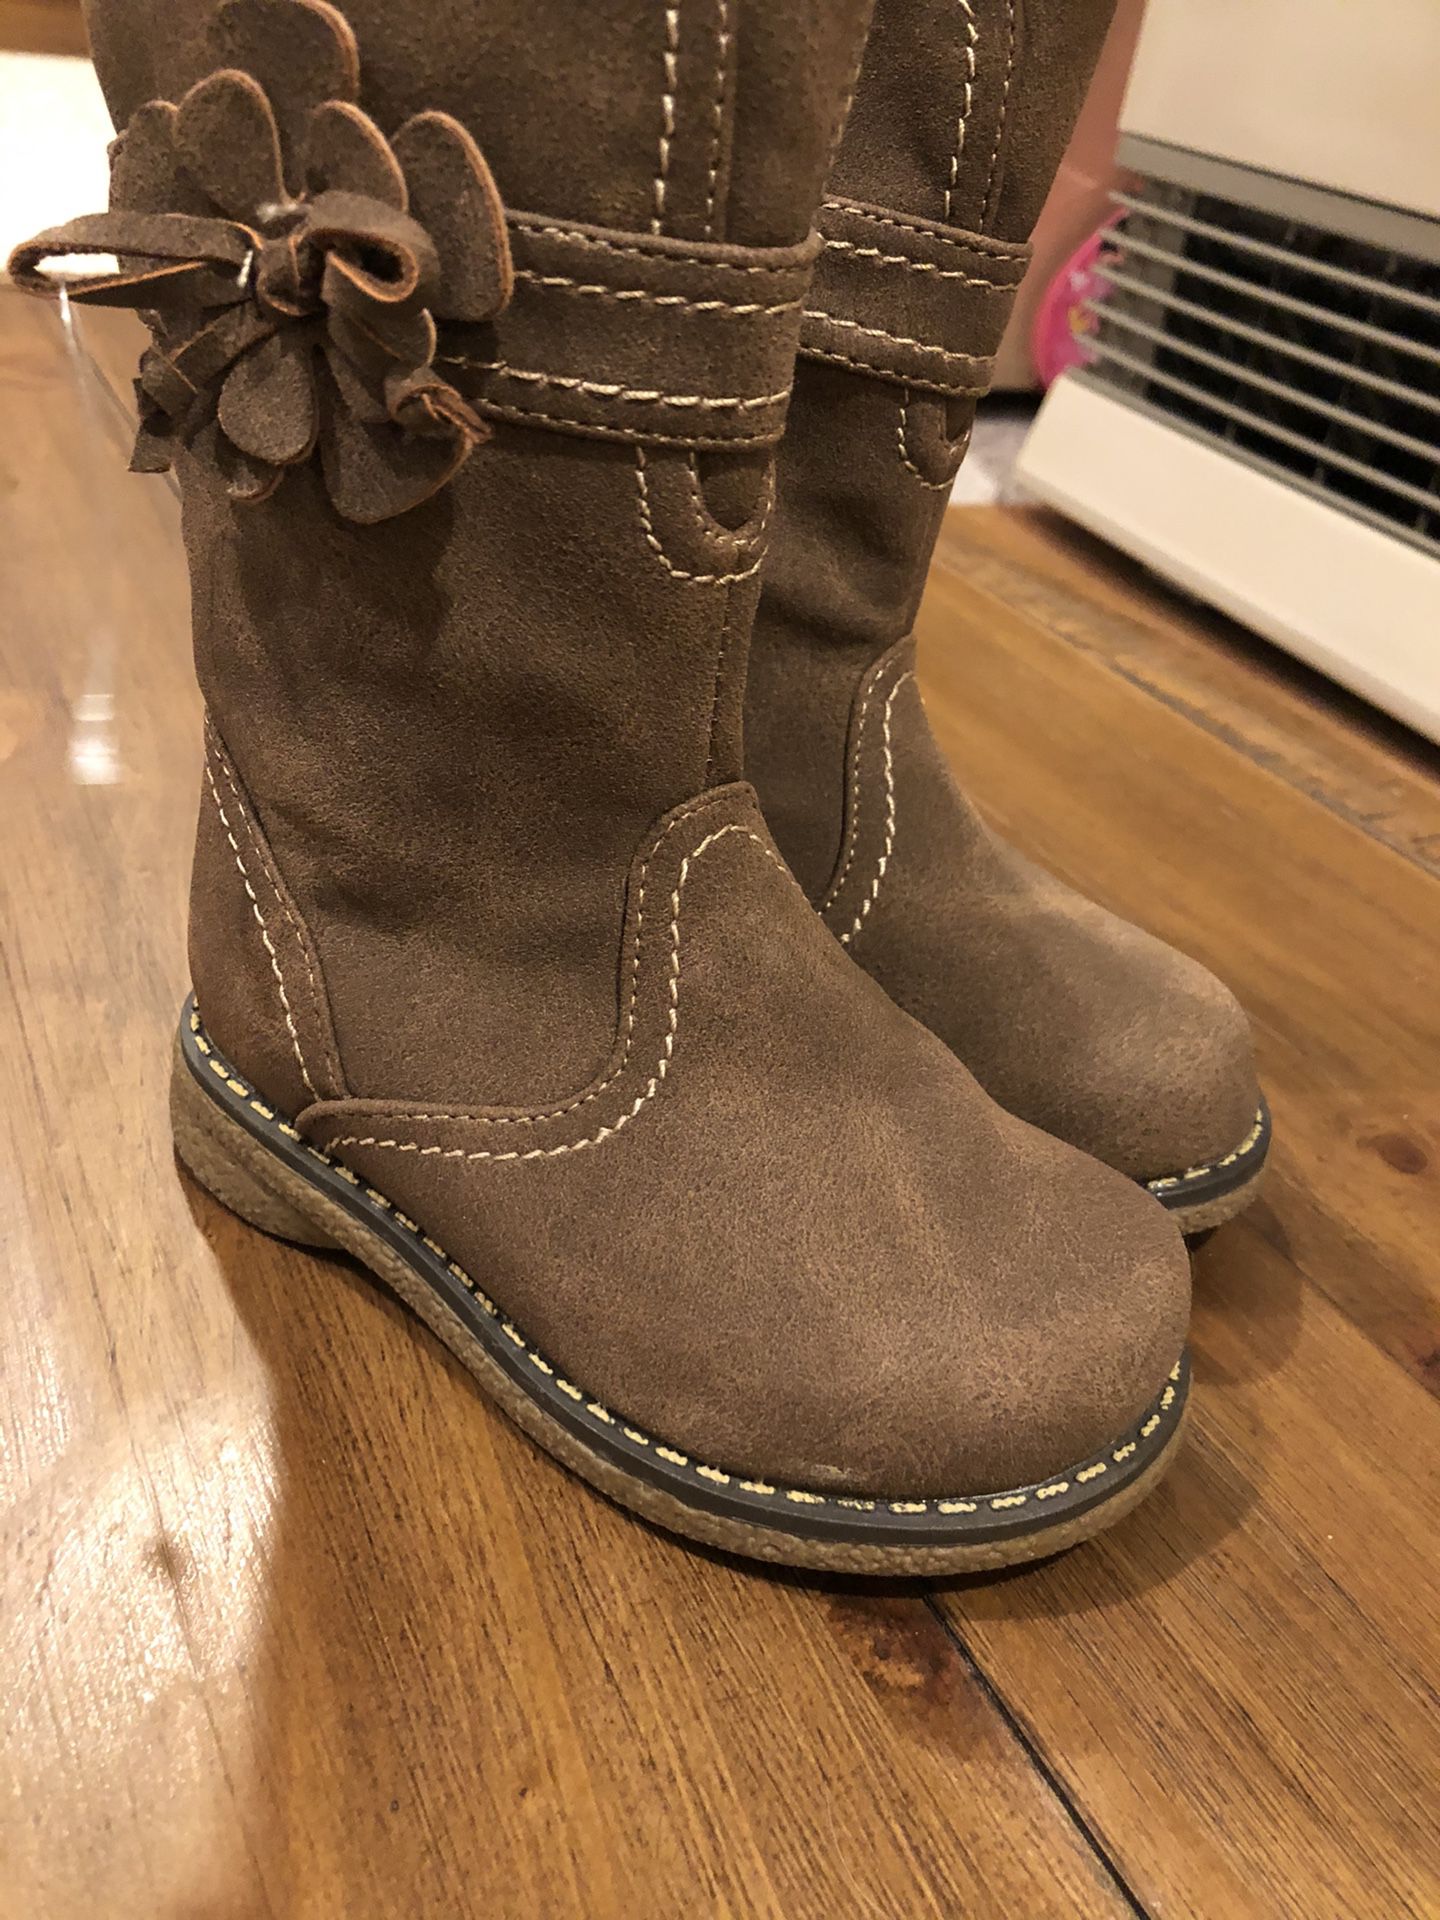 Girls boots size 7